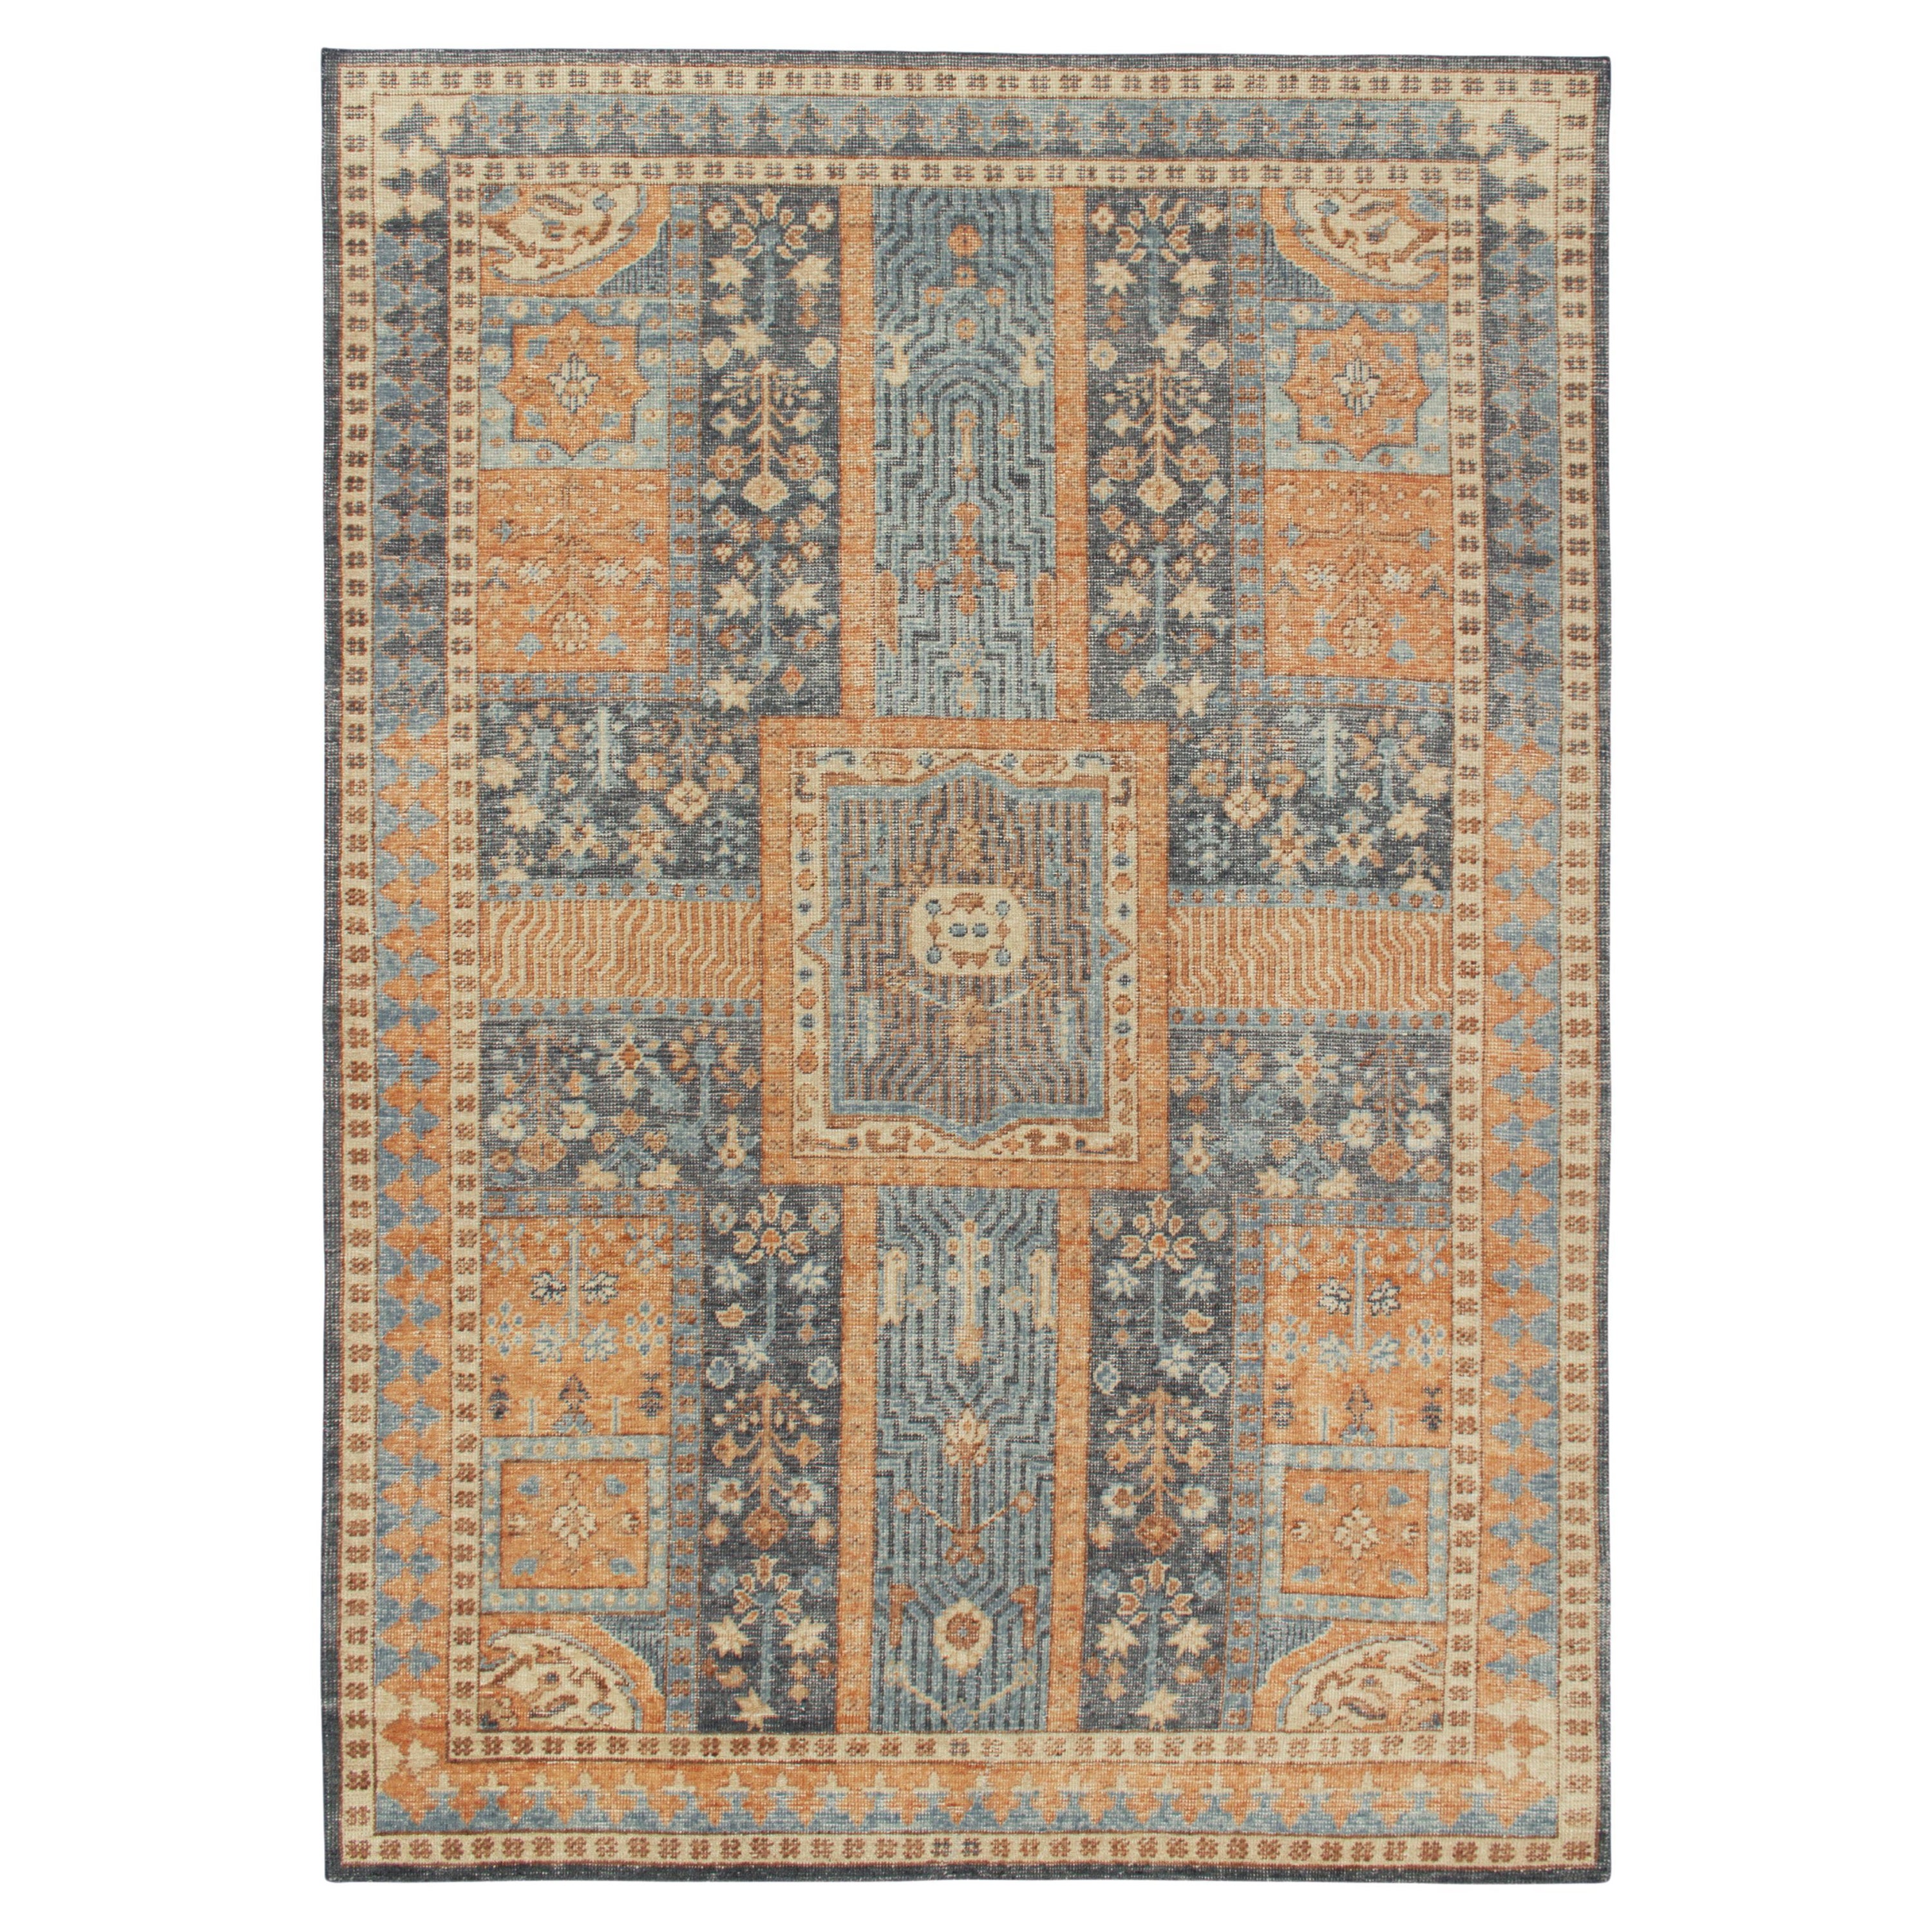 Rug & Kilim's Antique Persian Style Distressed Rug in Blue, Gold Garden Pattern